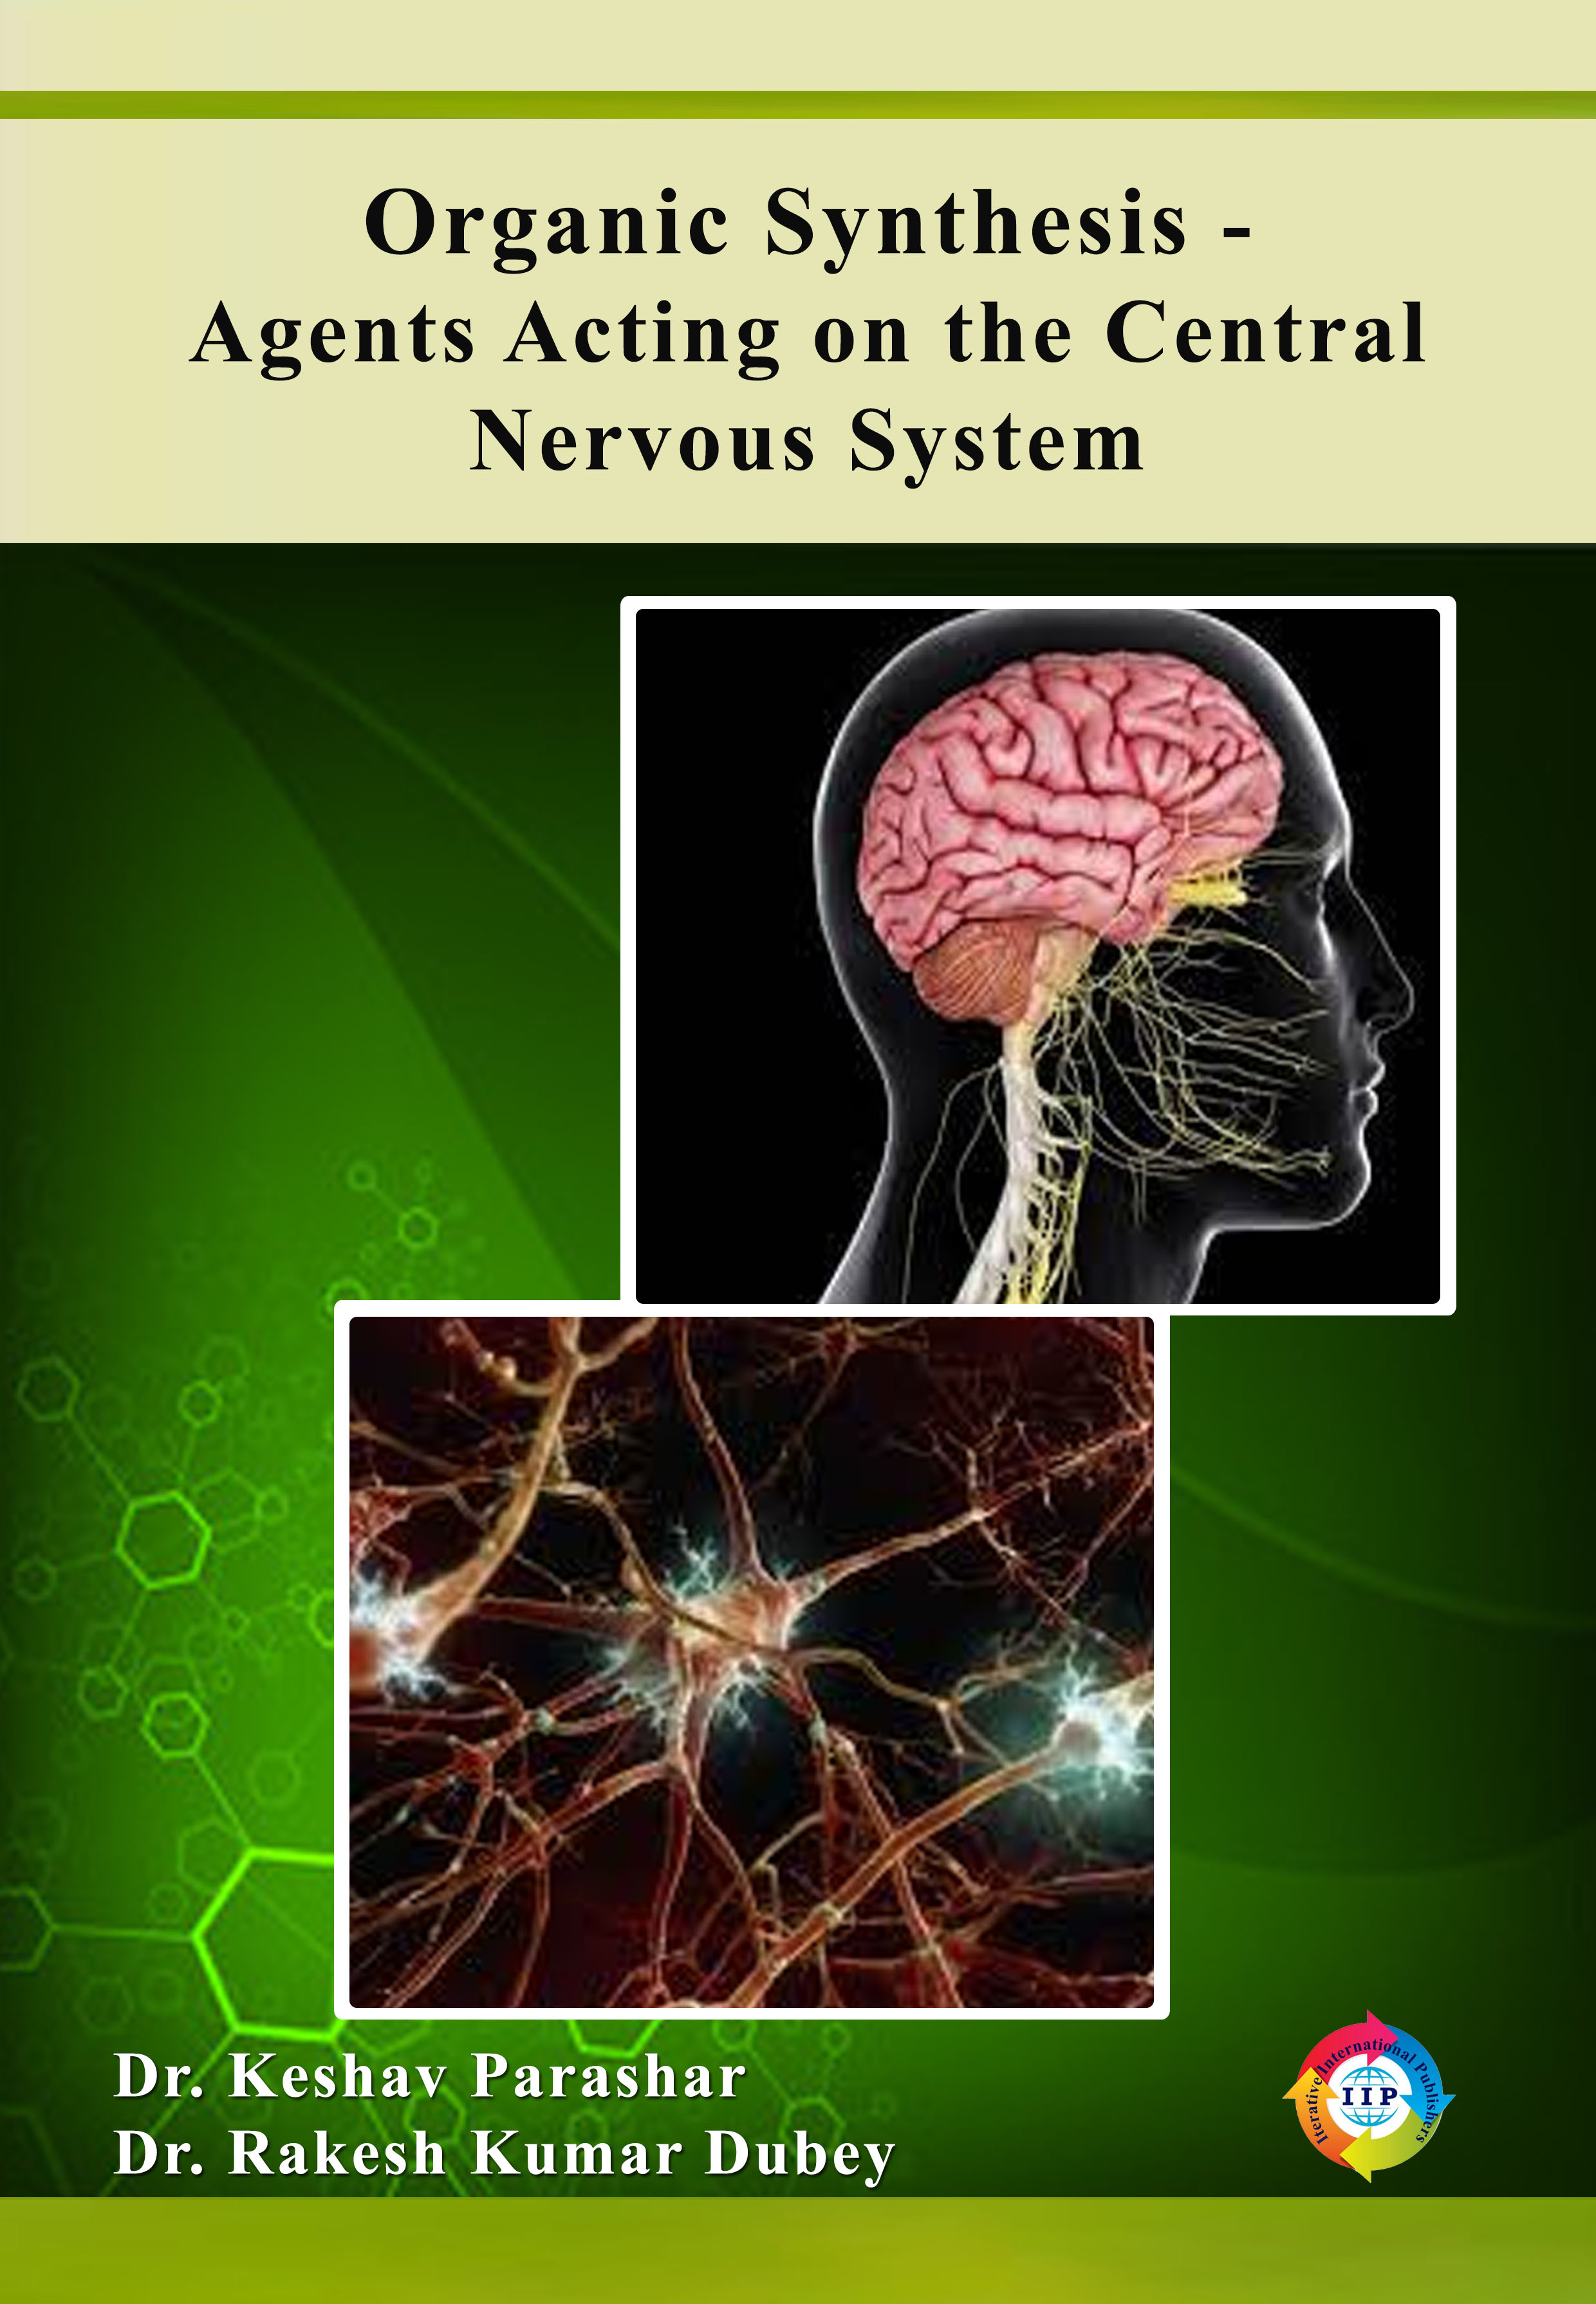 ORGANIC SYNTHESIS-AGENTS ACTING ON THE CENTRAL NERVOUS SYSTEM